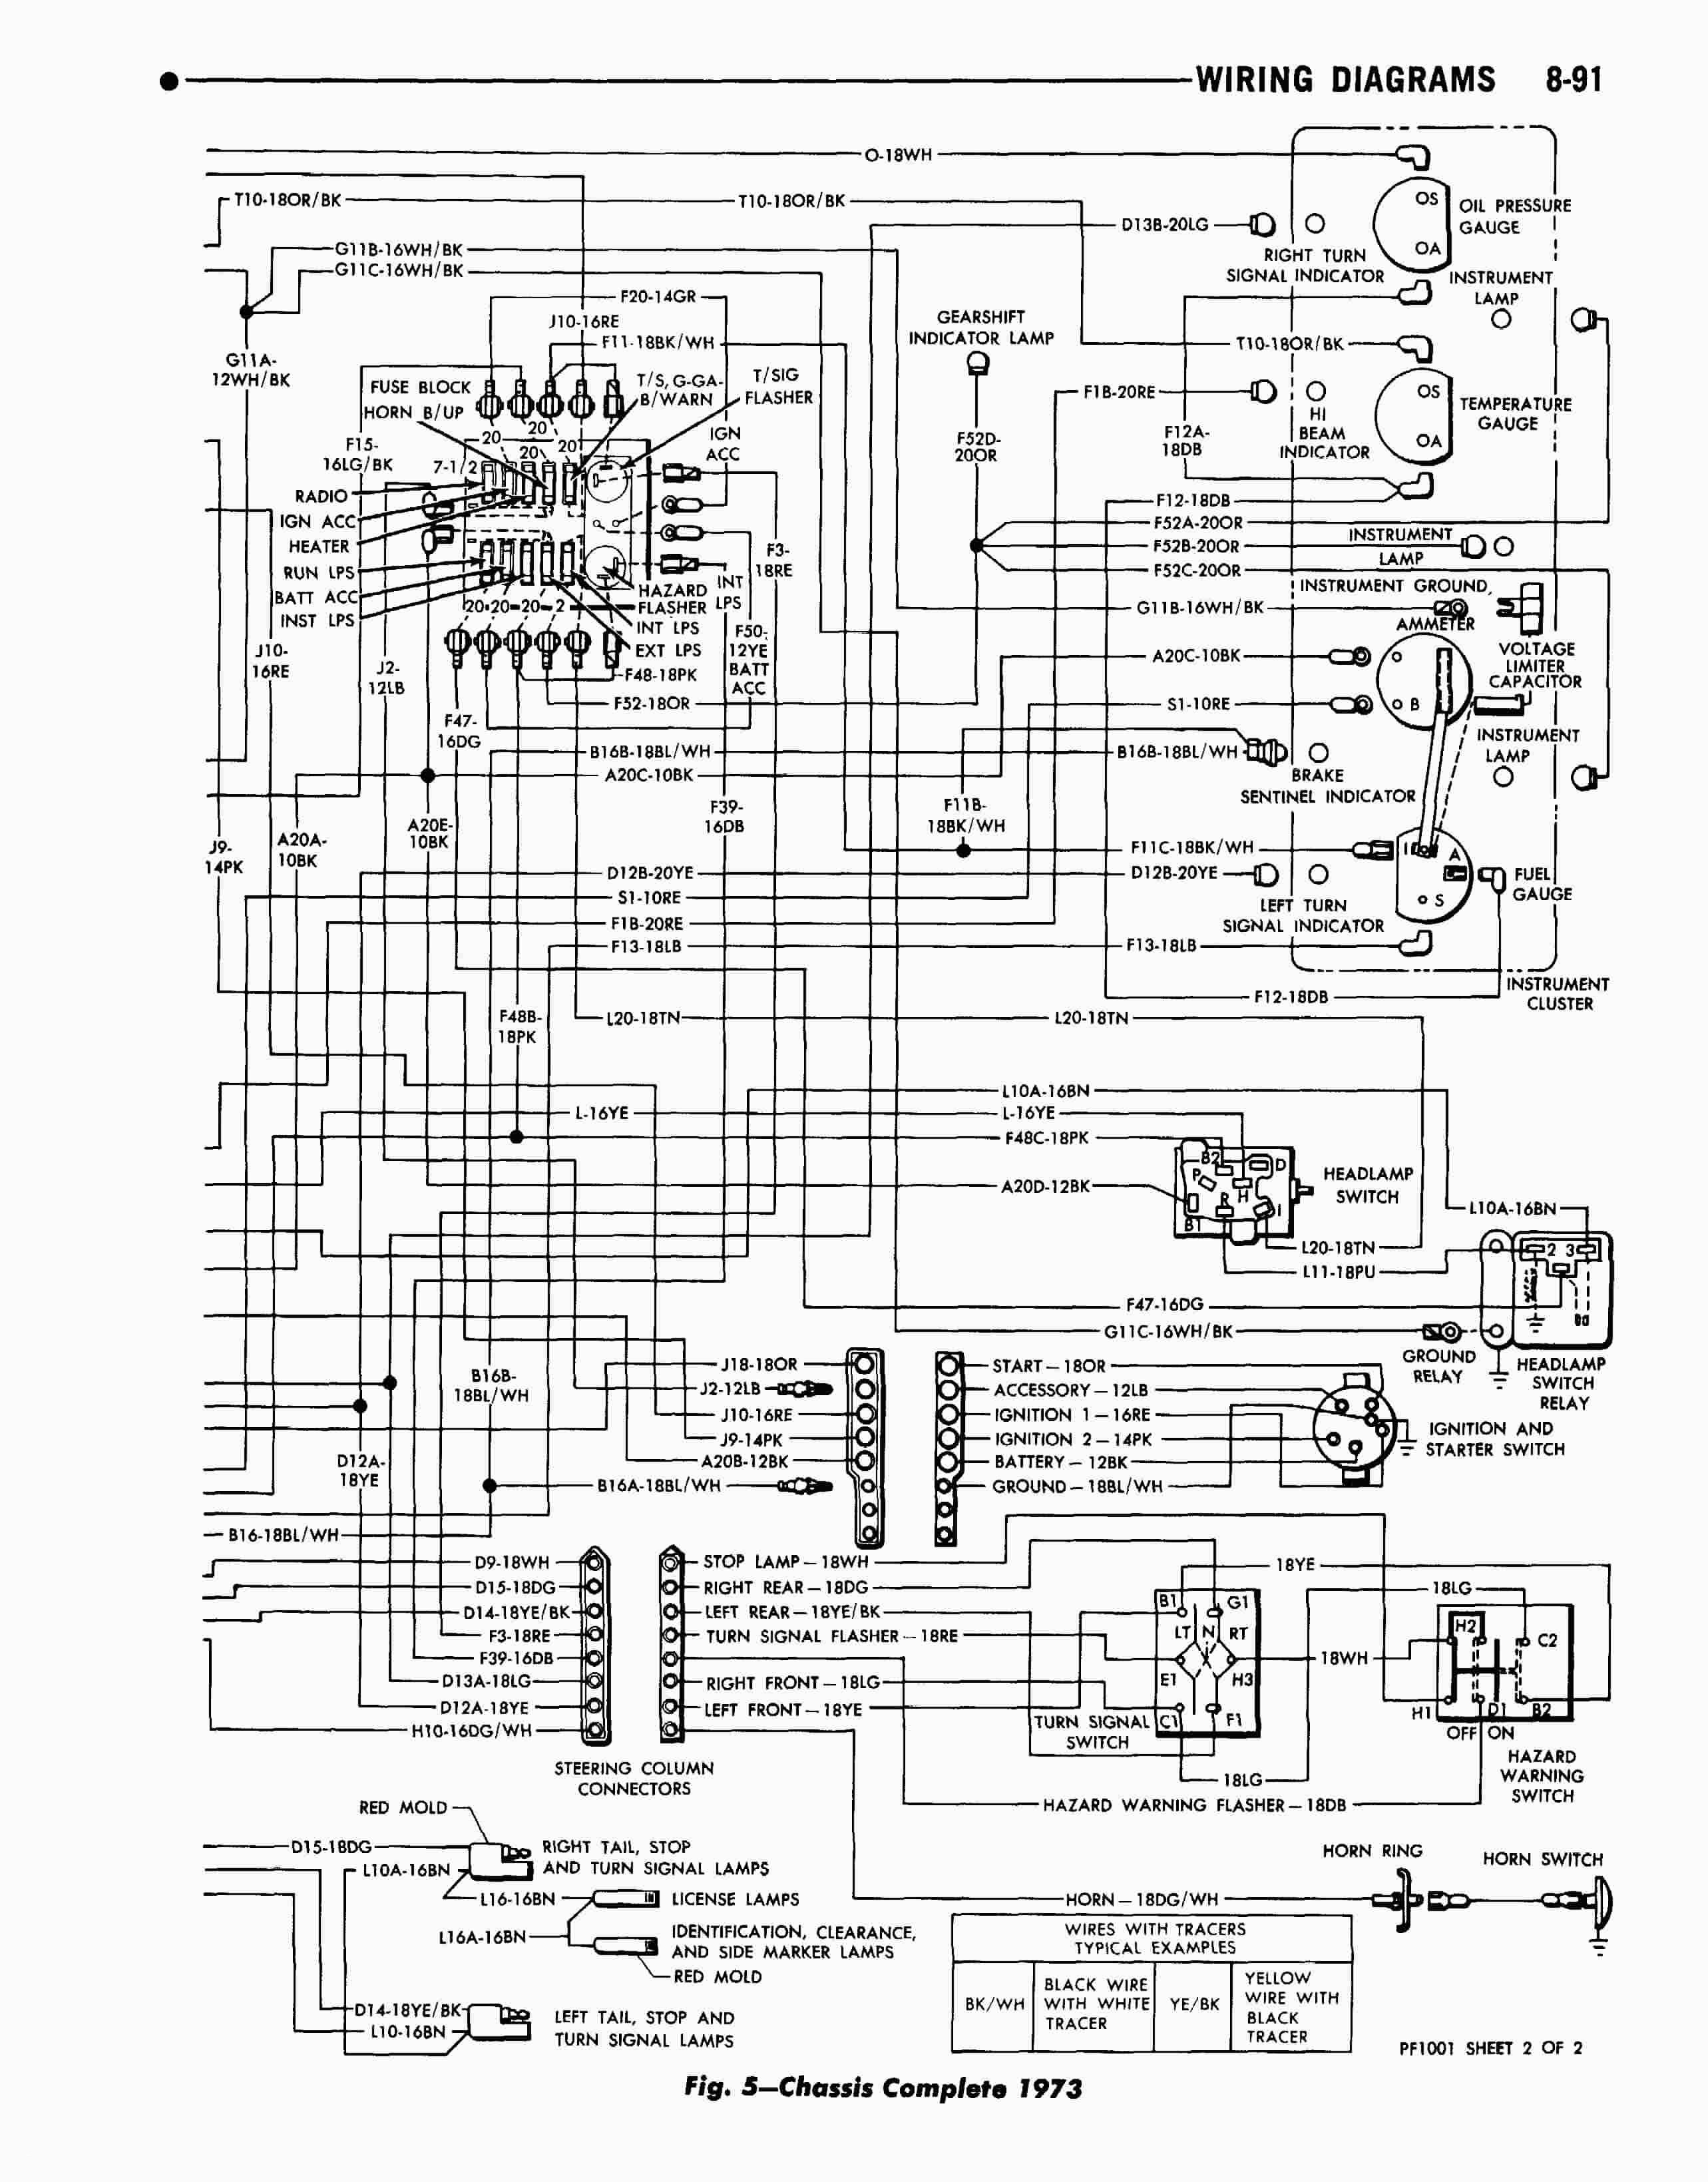 Ditch Witch Parts Diagram Runva Winch Wiring Diagram Hecho Runva Performance Winches Support Of Ditch Witch Parts Diagram